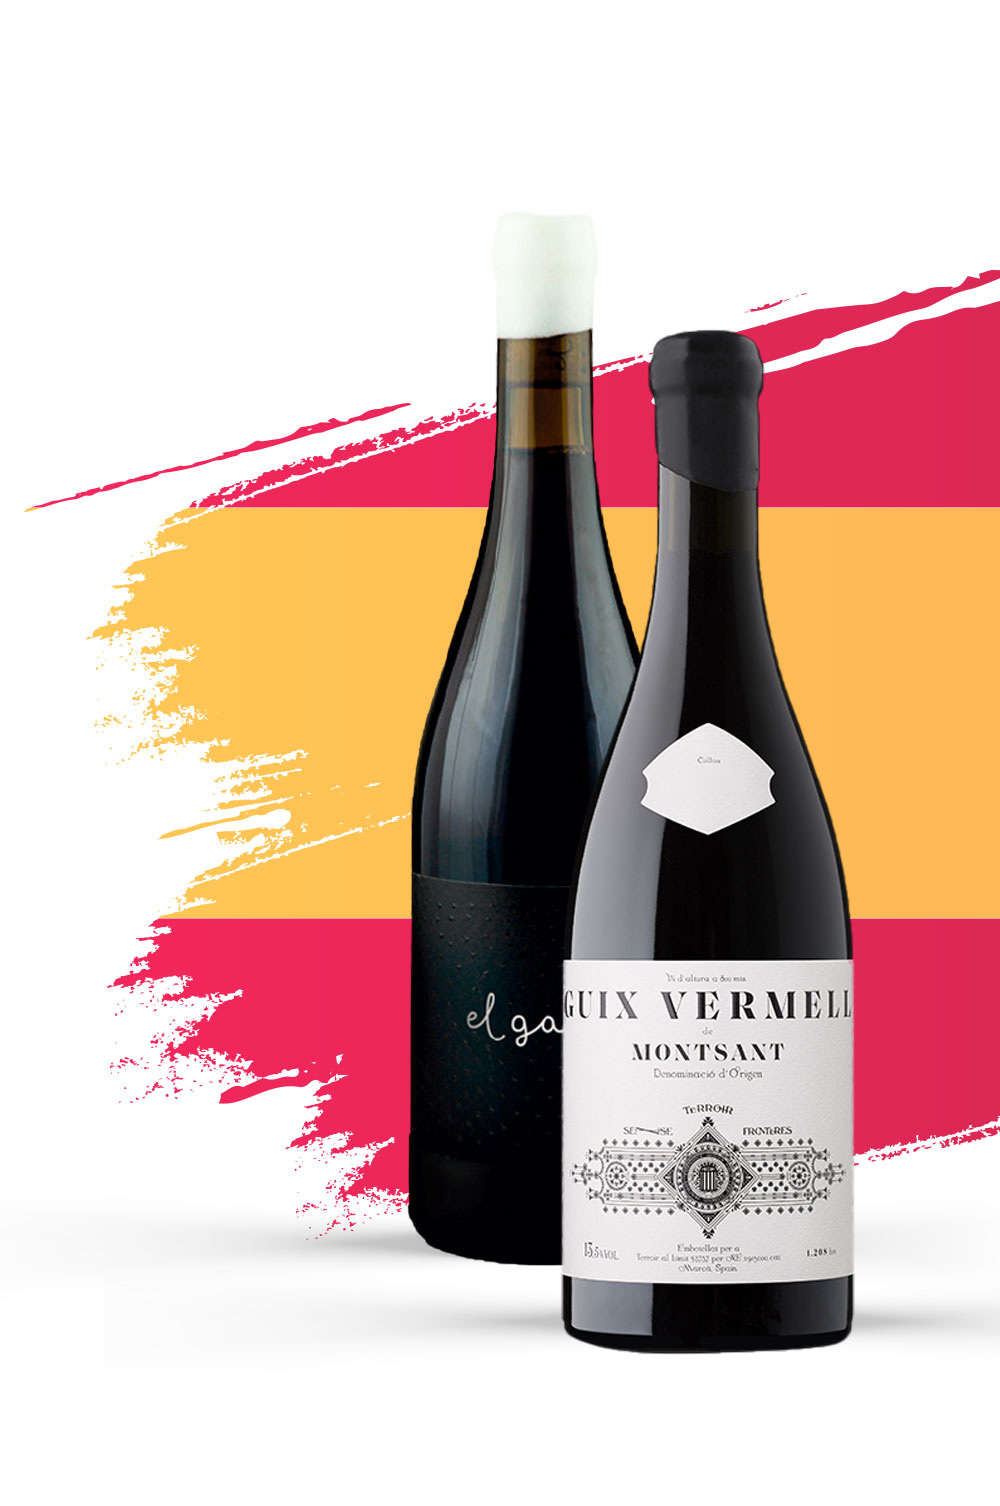 April 23rd is a day to drink the best wines from Spain